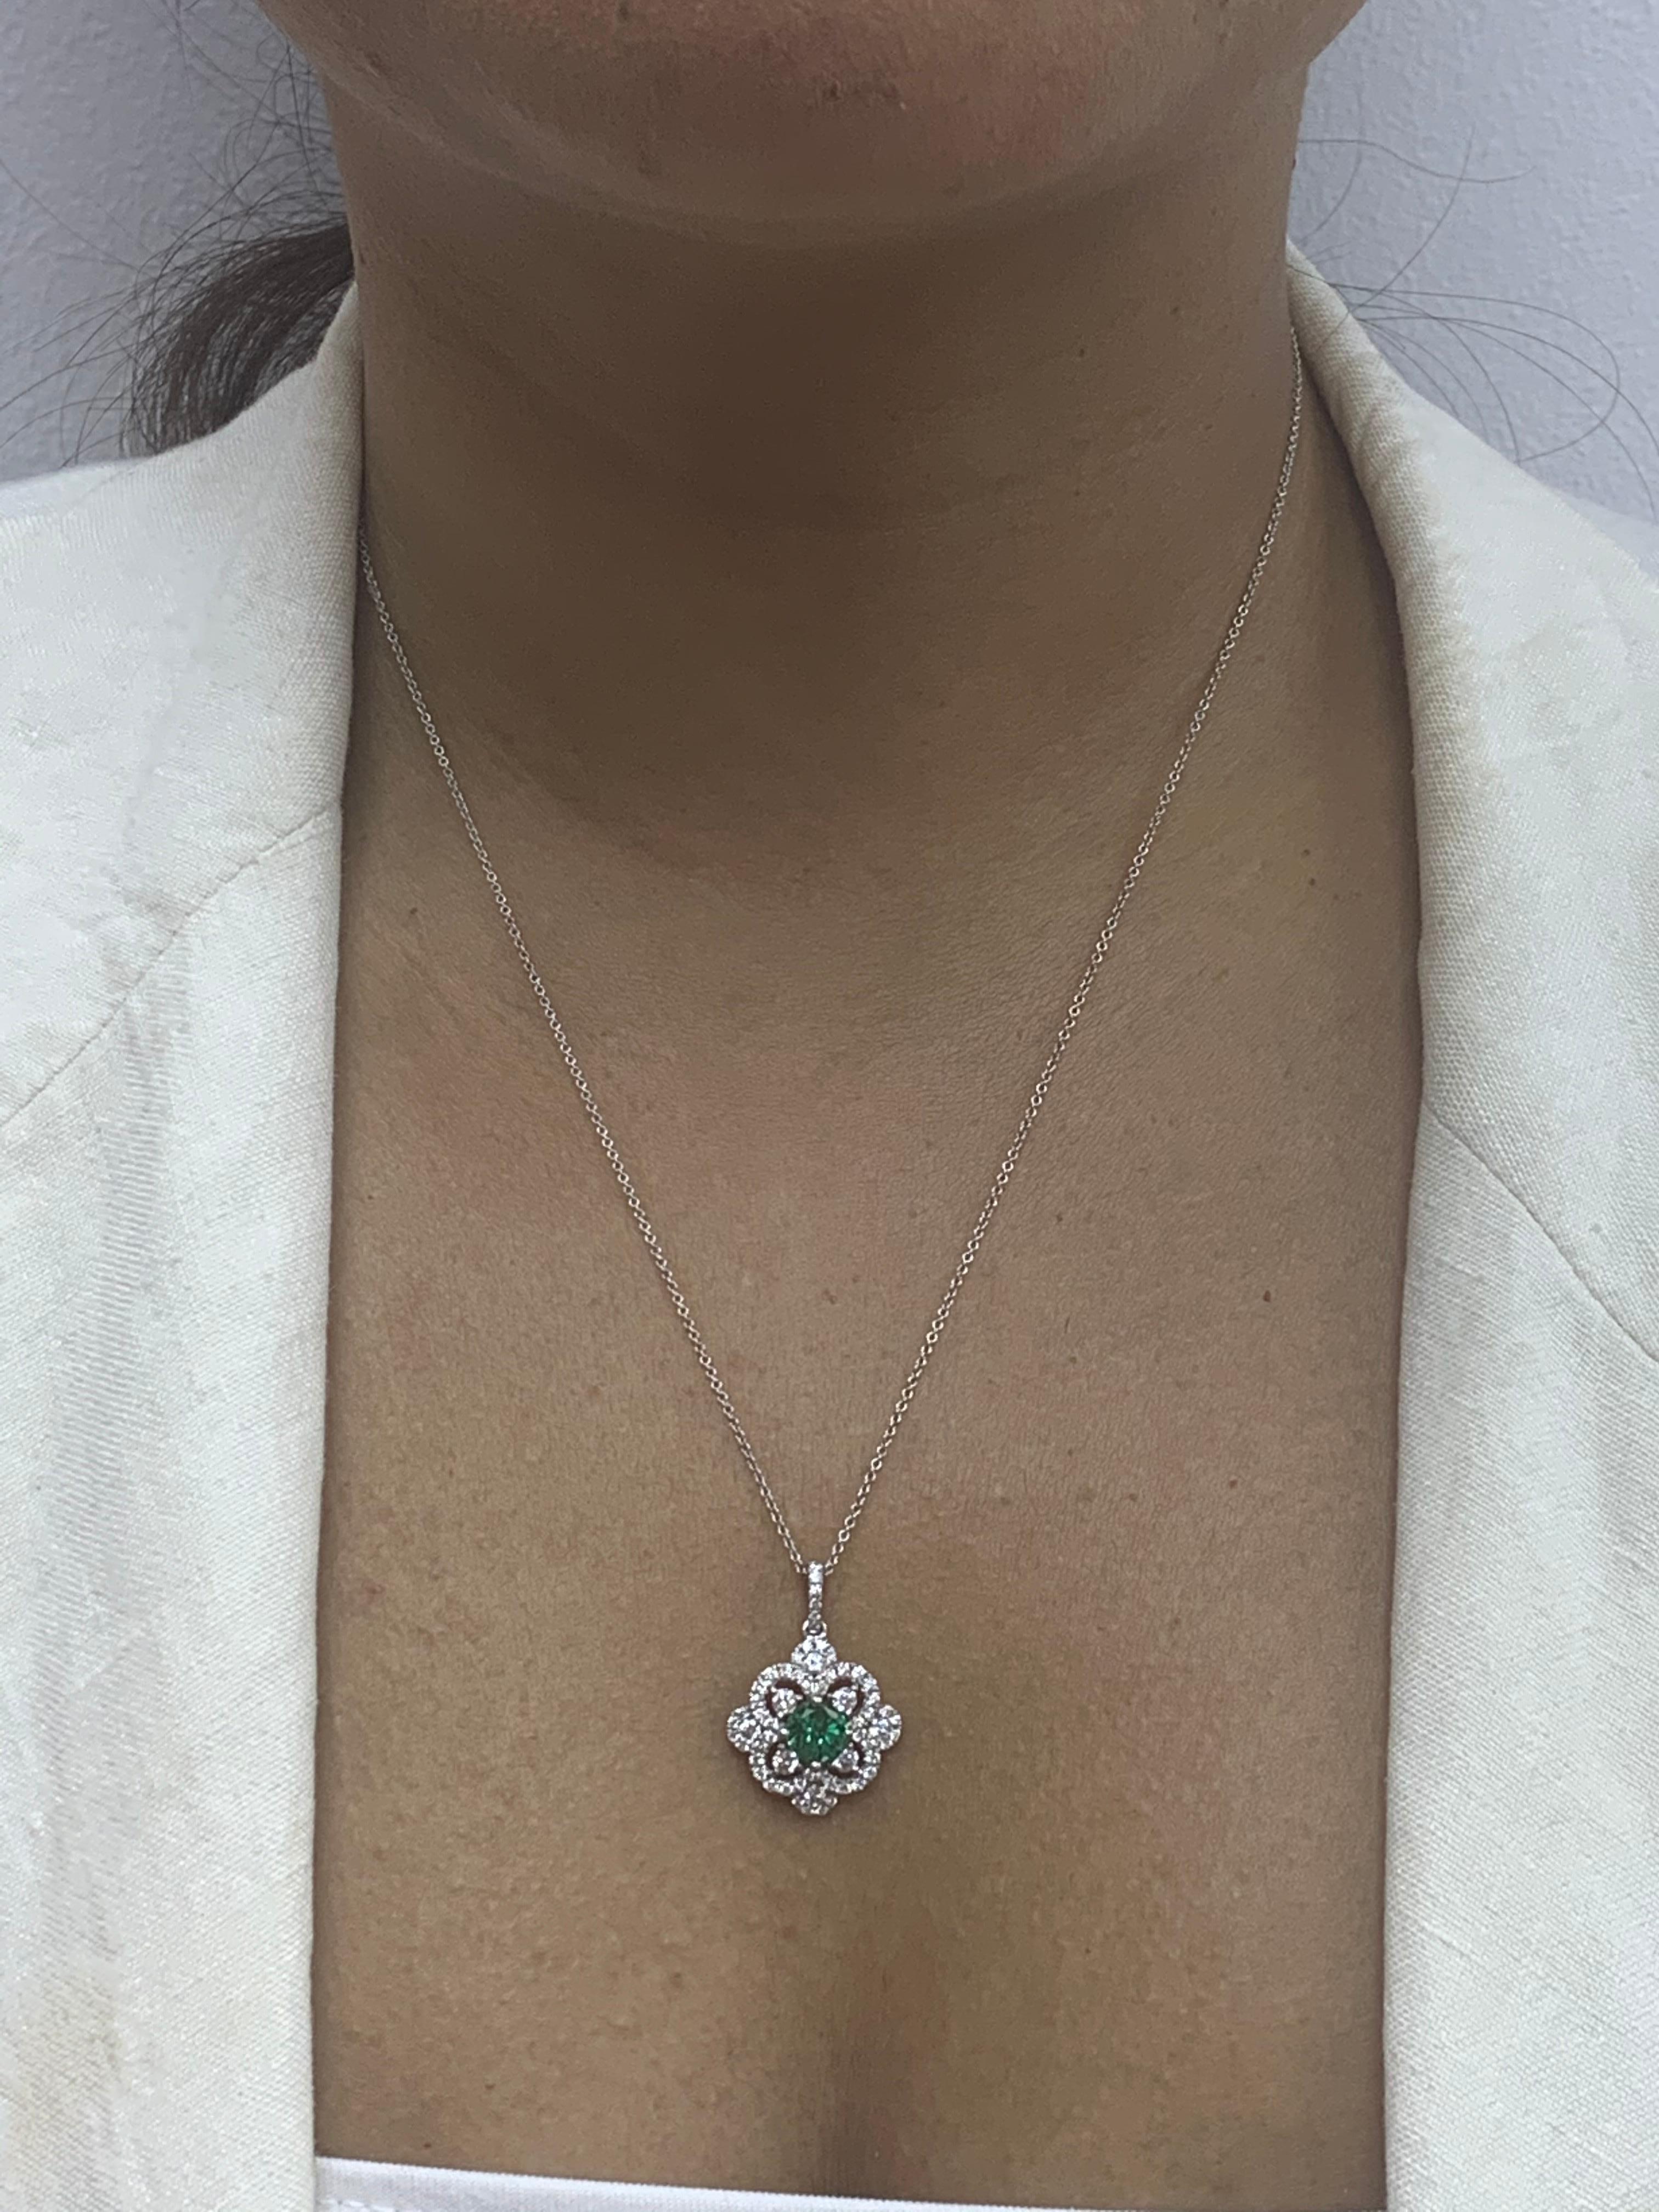 0.81 Carat Round Cut Emerald and Diamond Pendant Necklace in 18K For Sale 2